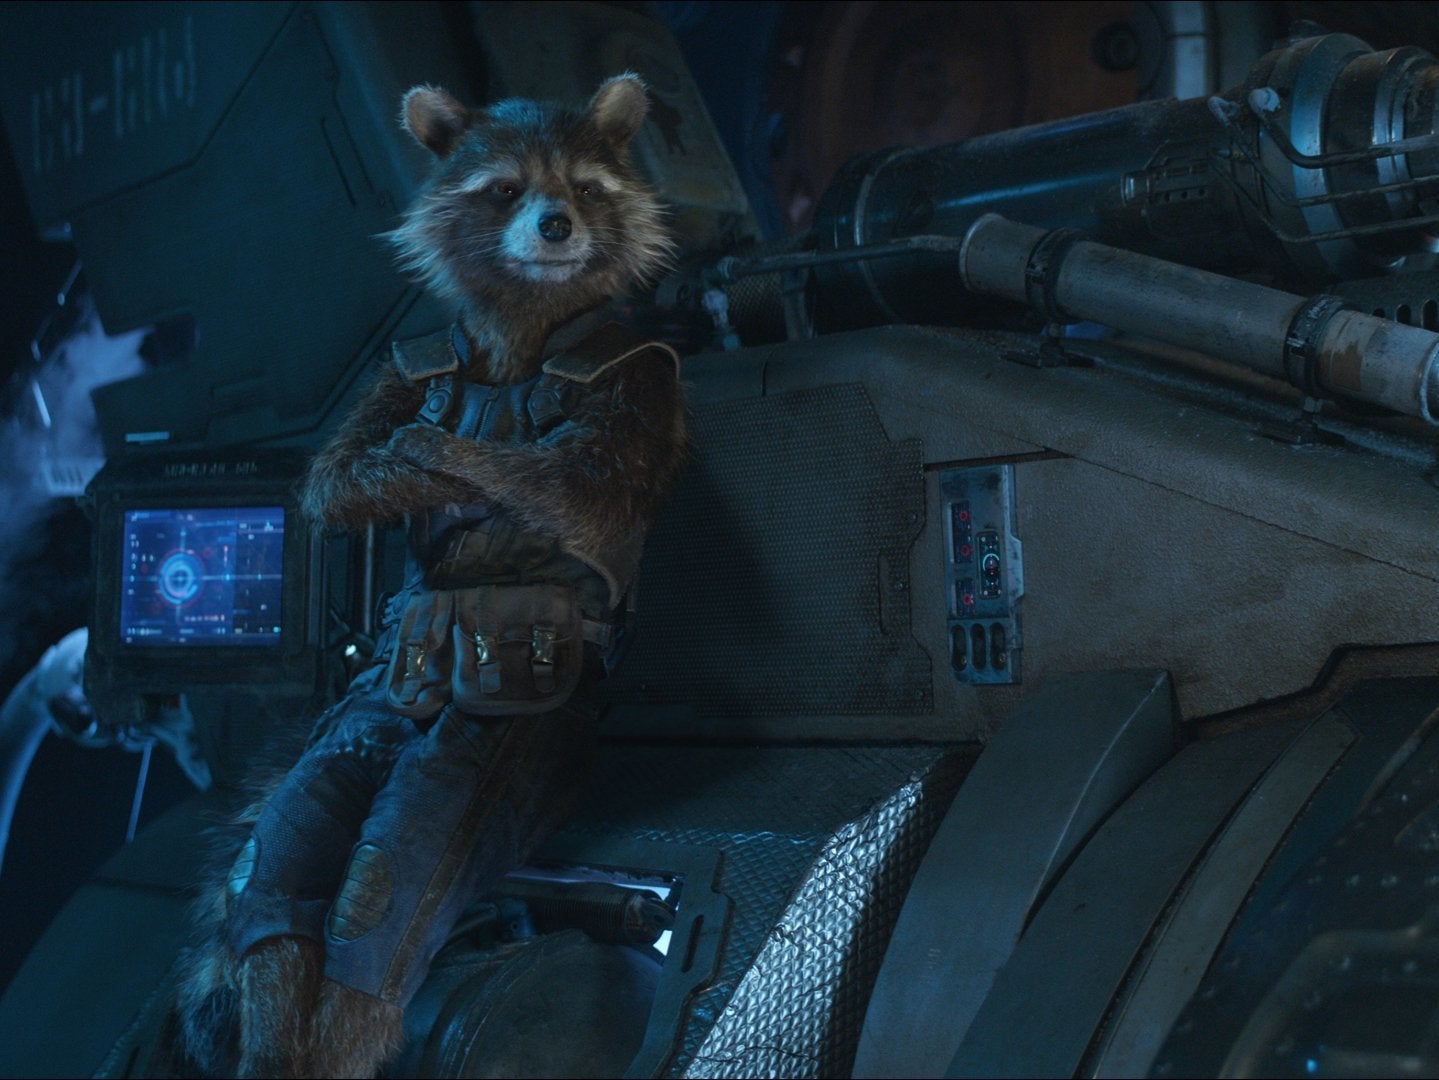 Oreo the Raccoon: Model for Rocket in Guardians of the Galaxy, dies aged 10 | The ...1439 x 1080